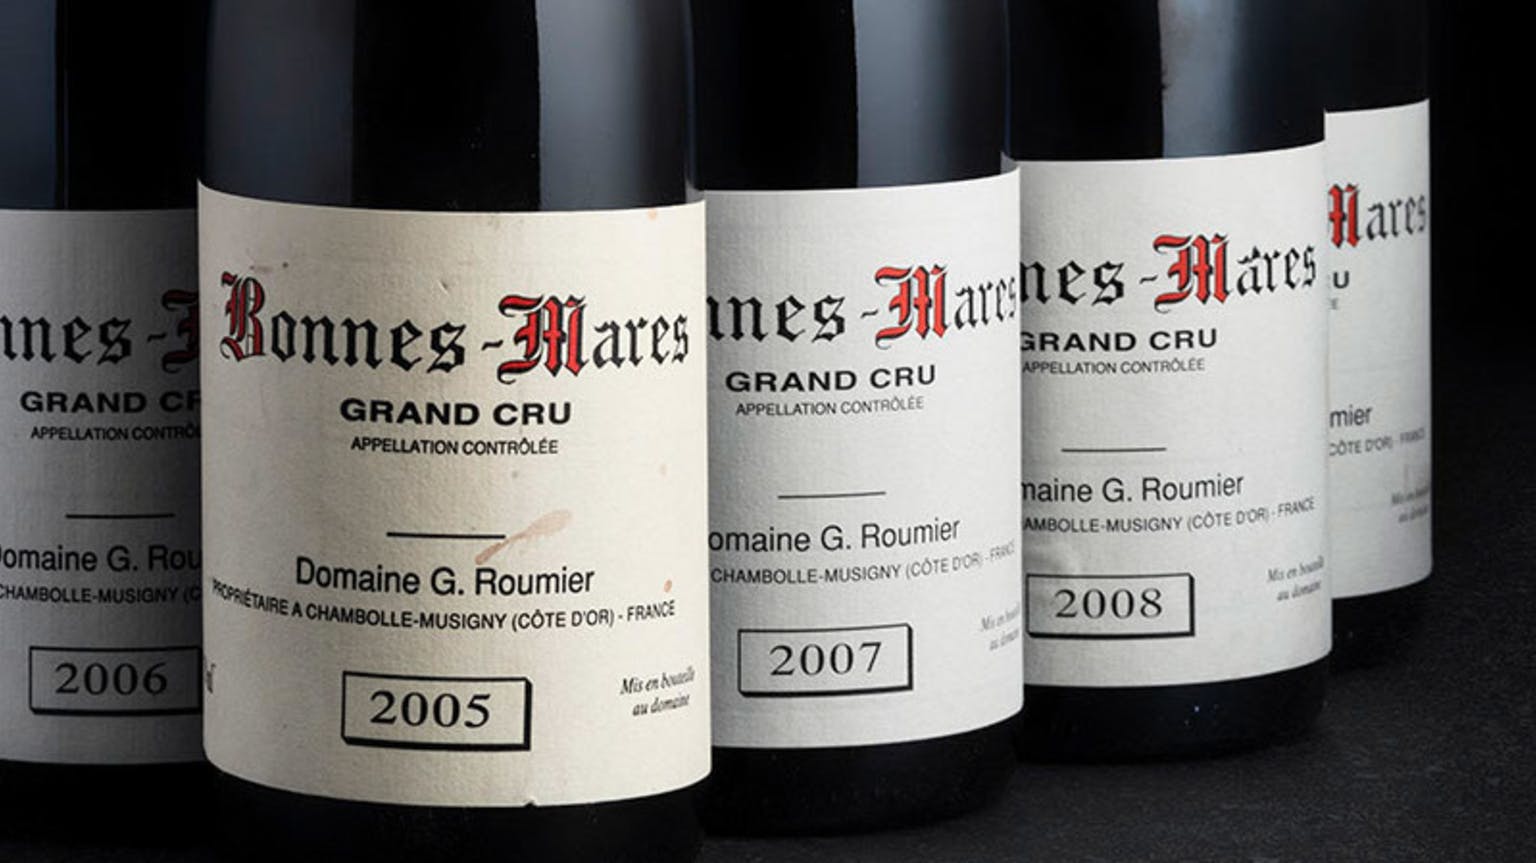 Two decades of Roumier’s Bonnes Mares with William Kelley